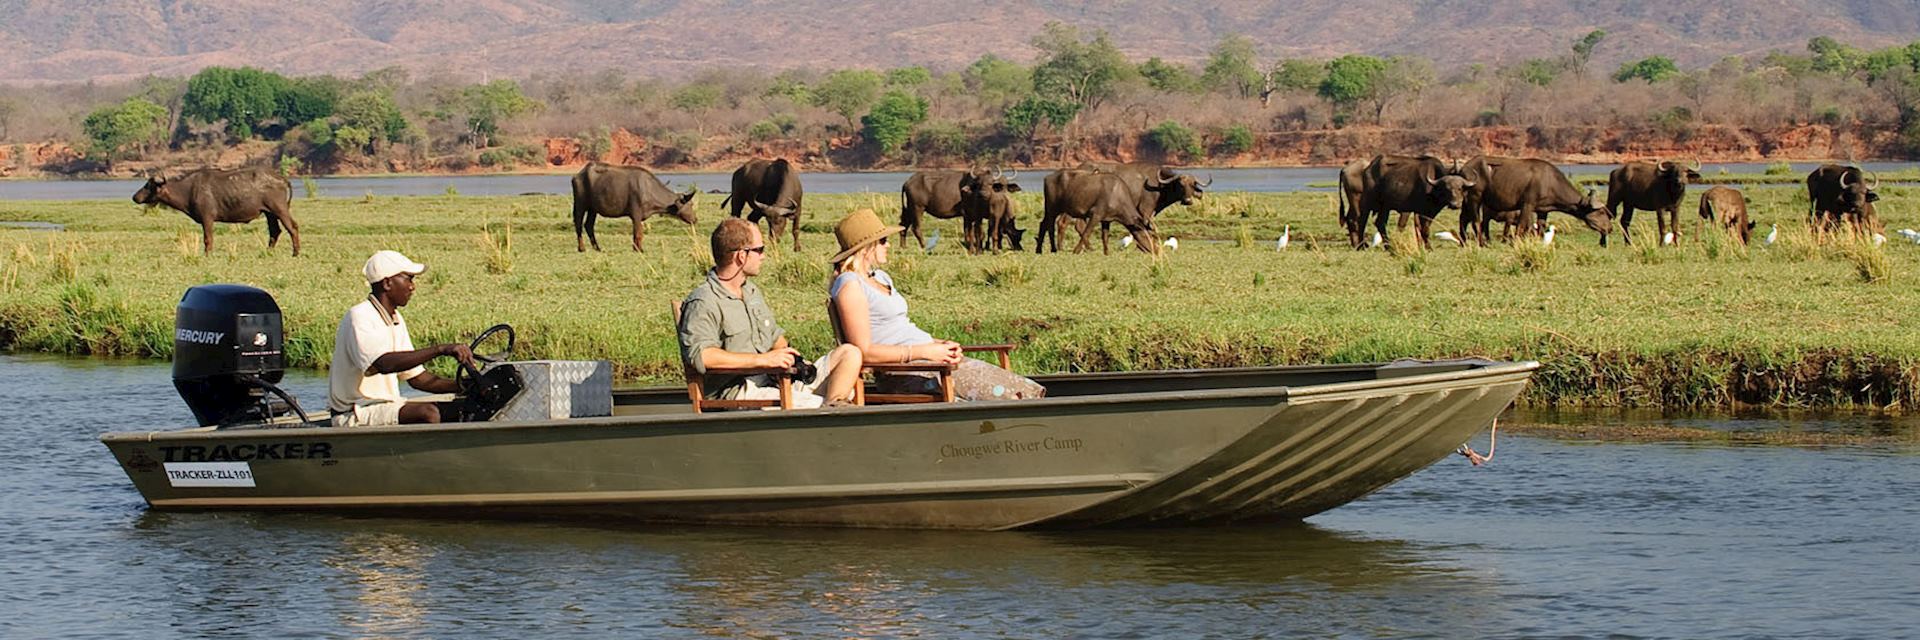 River cruise from Chongwe River House